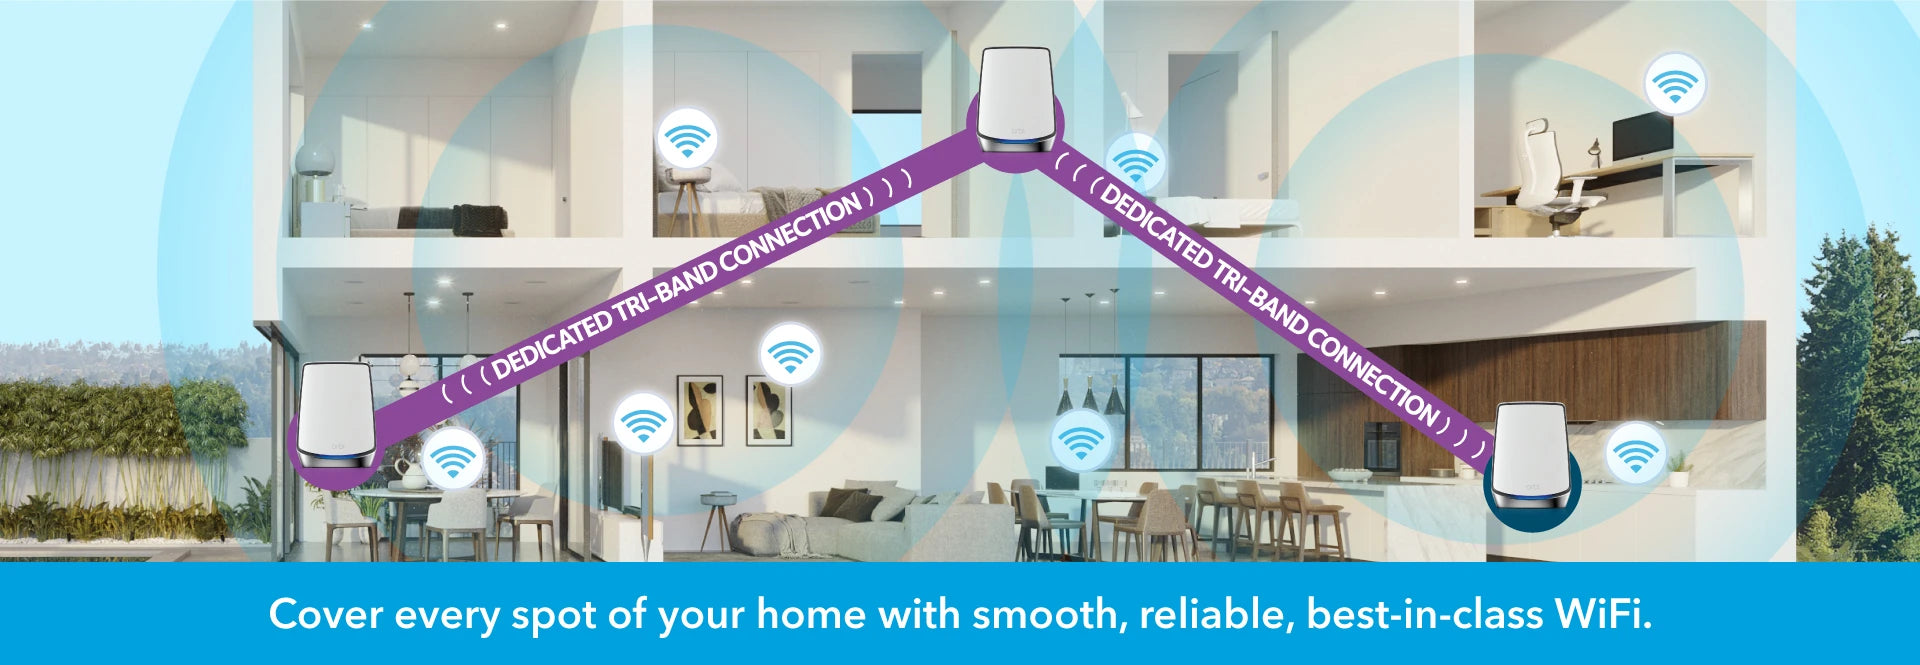 With Orbi Mesh dedicated backhaul streams, use the satellites to cover every inch of your home with smooth, reliable, best-in-class WiFi